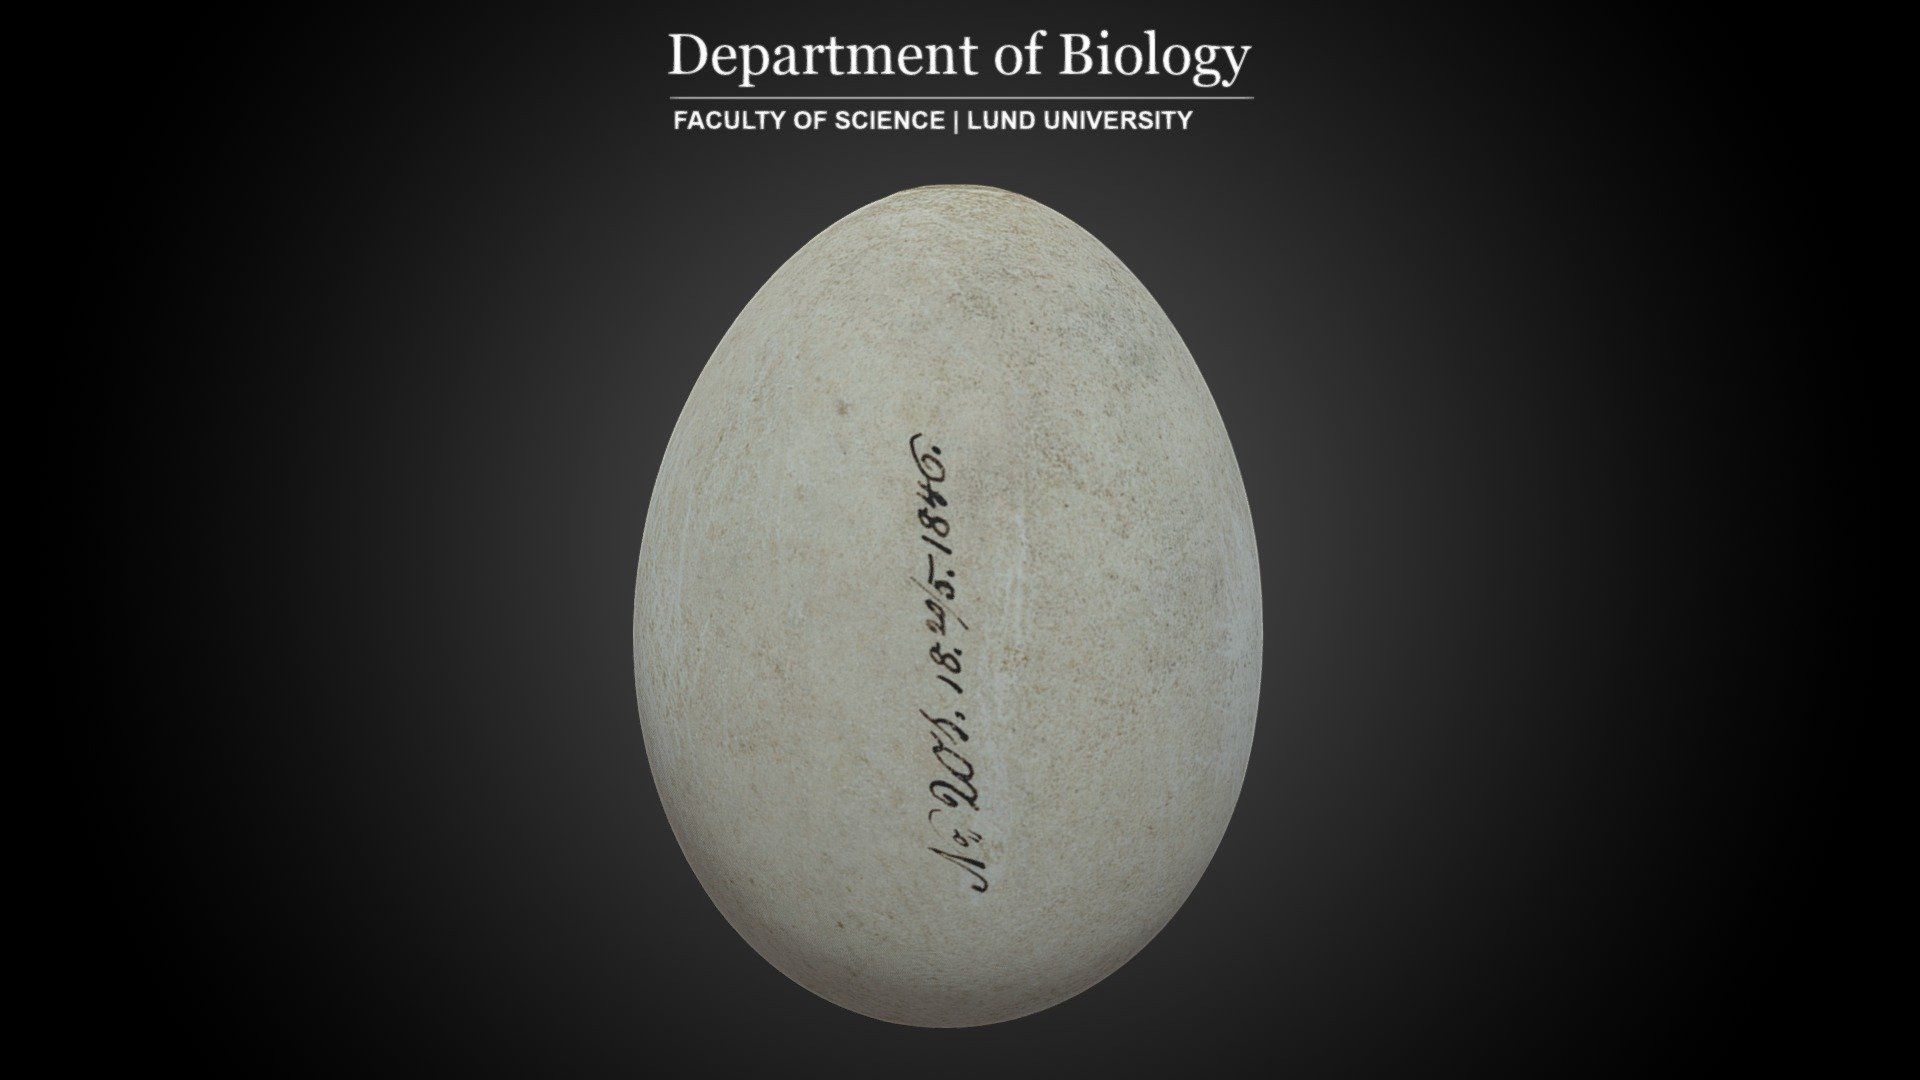 Scan of white stork (Ciconia ciconia) egg from the Biological Museum at Lund University, Sweden.

Year 1846

Photogrammetry scan: Canon EOS 5DS R + Canon EF 24-70mm f/4L Macro IS USM + Agisoft Metashape 1.5 3d model